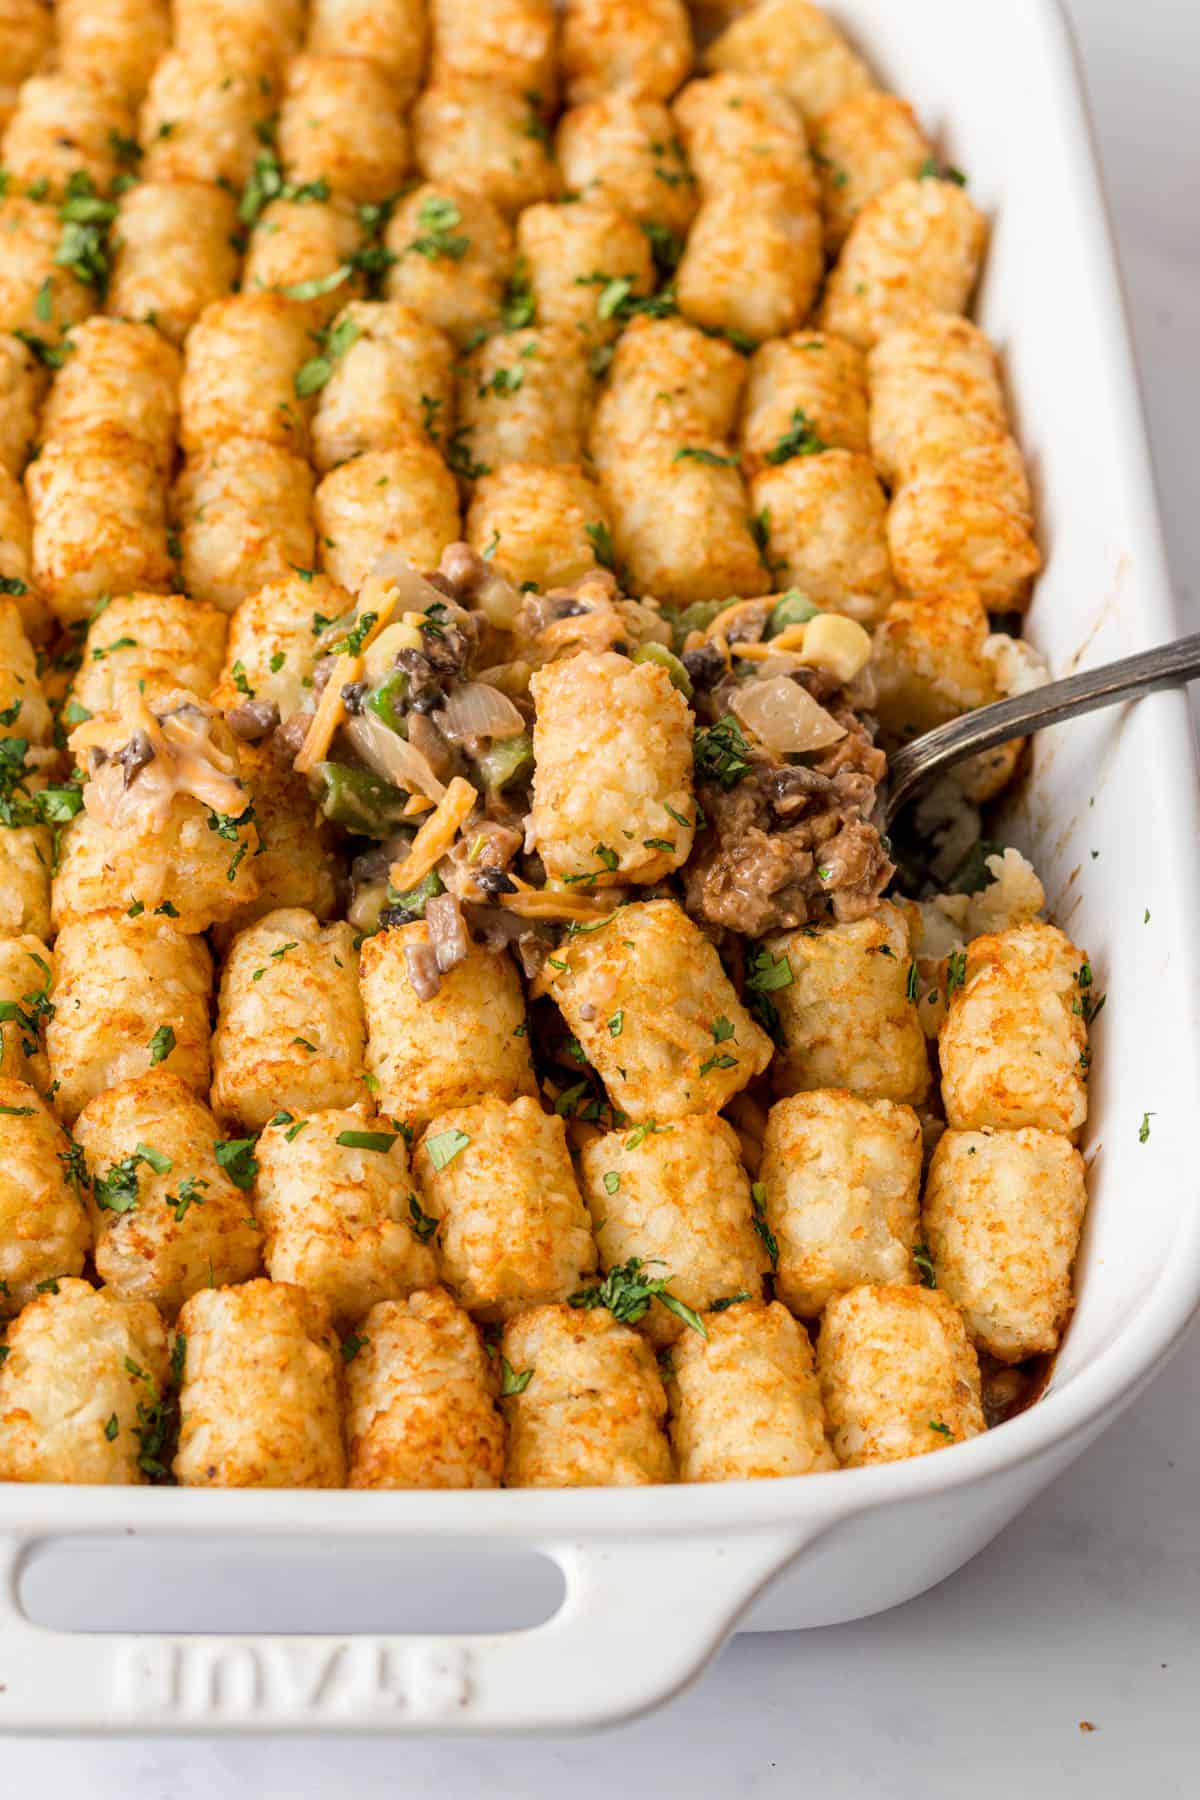 Tater tot casserole in white dish.